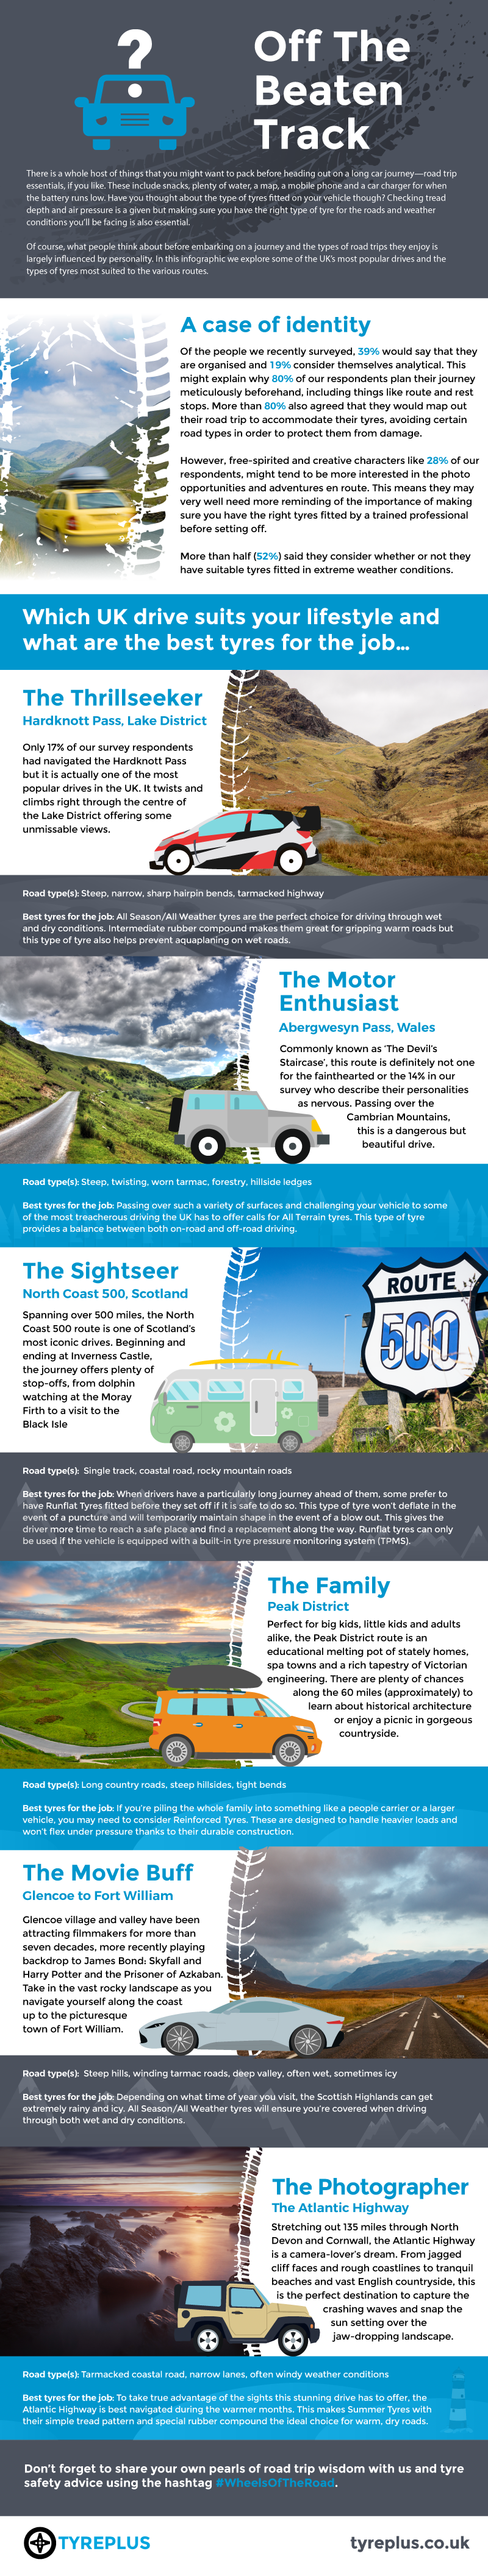 Off-The-Beaten-Track-Infographic (1) (2)